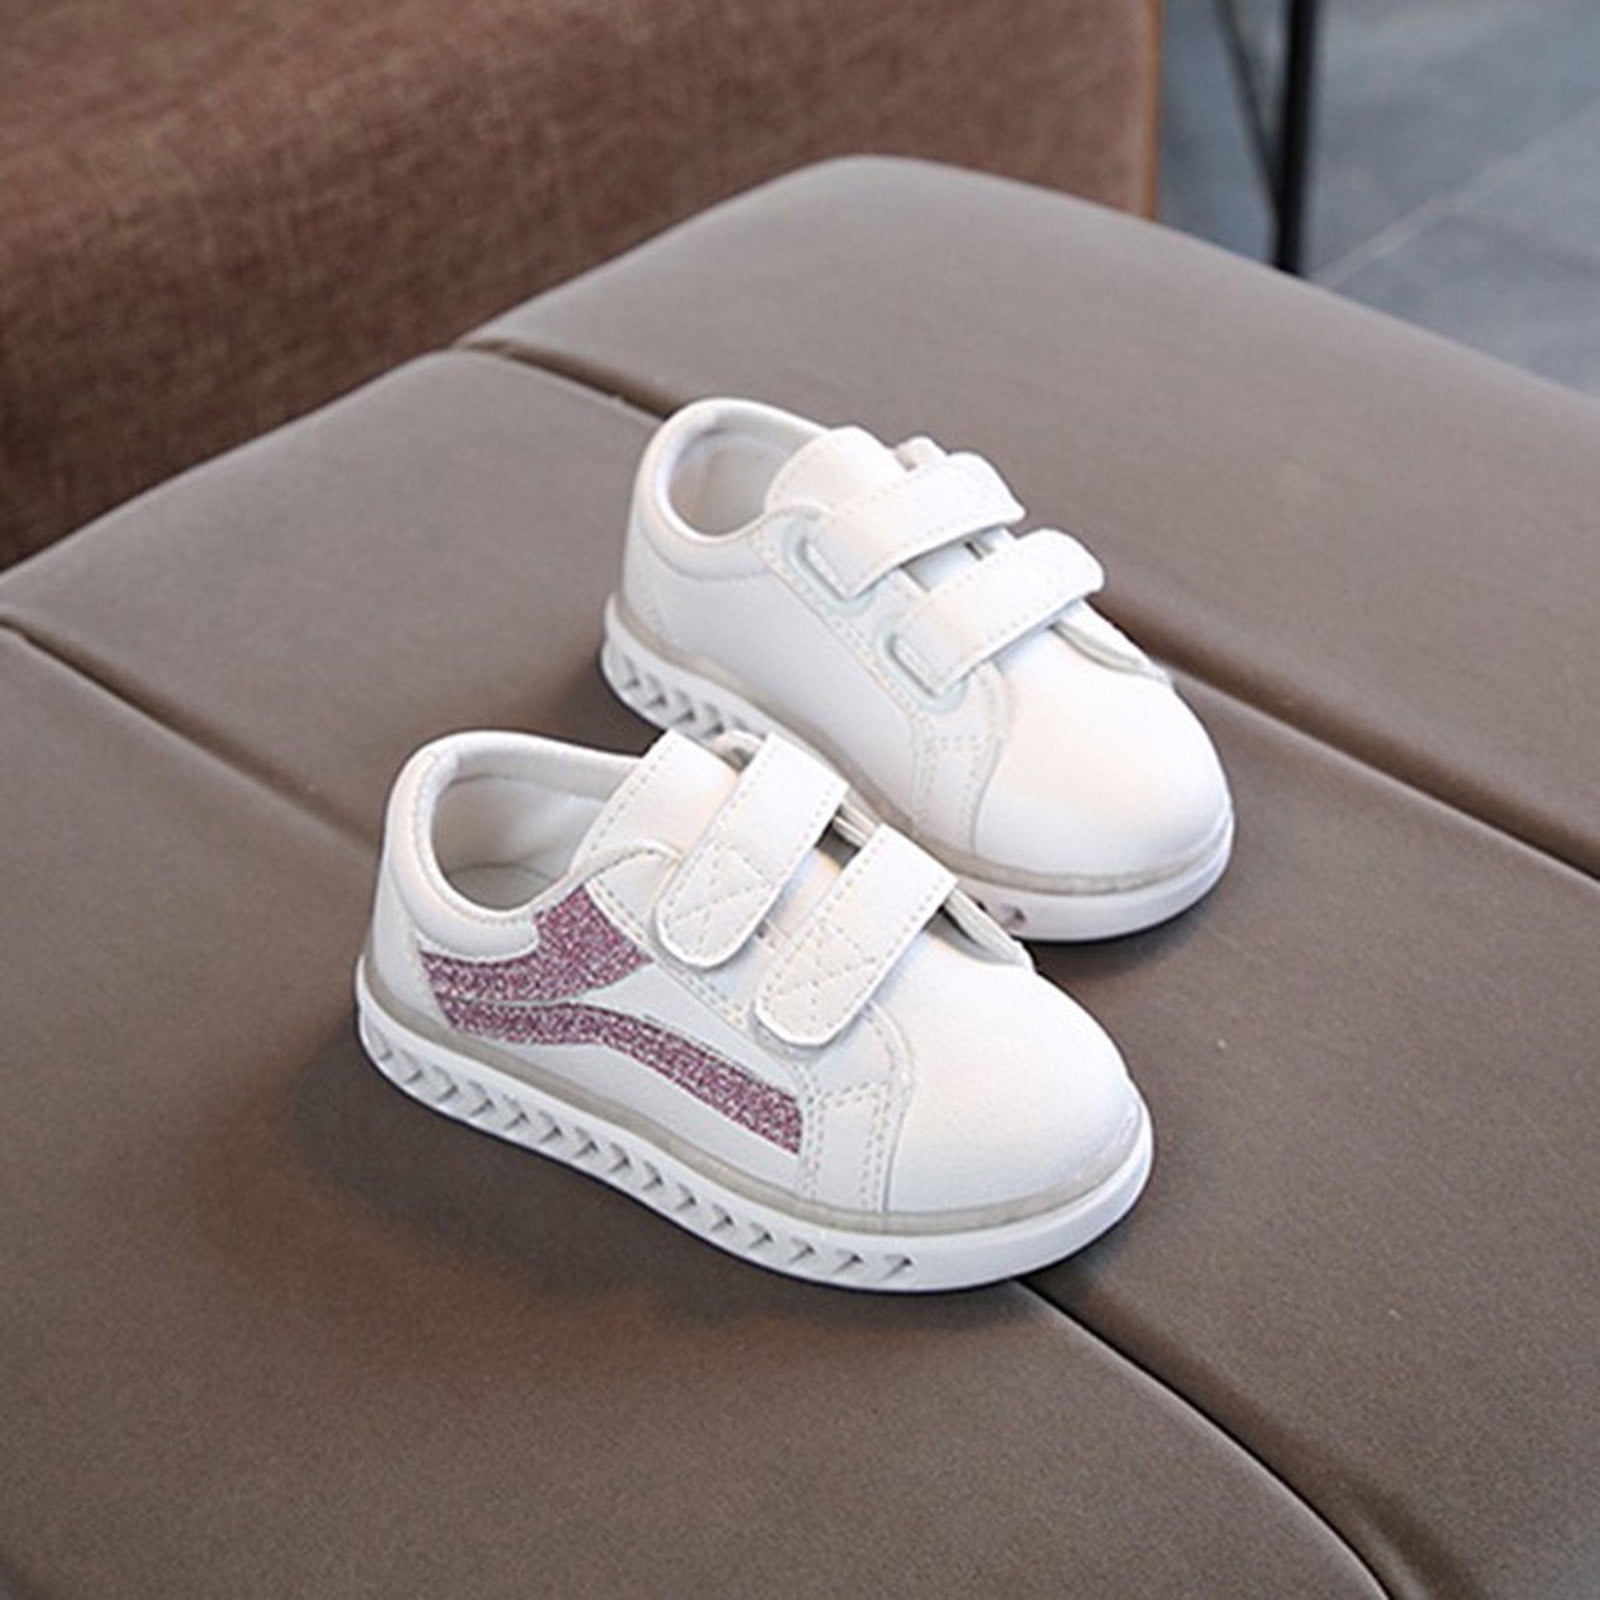 Loyisvidion Toddler Shoes Clearance